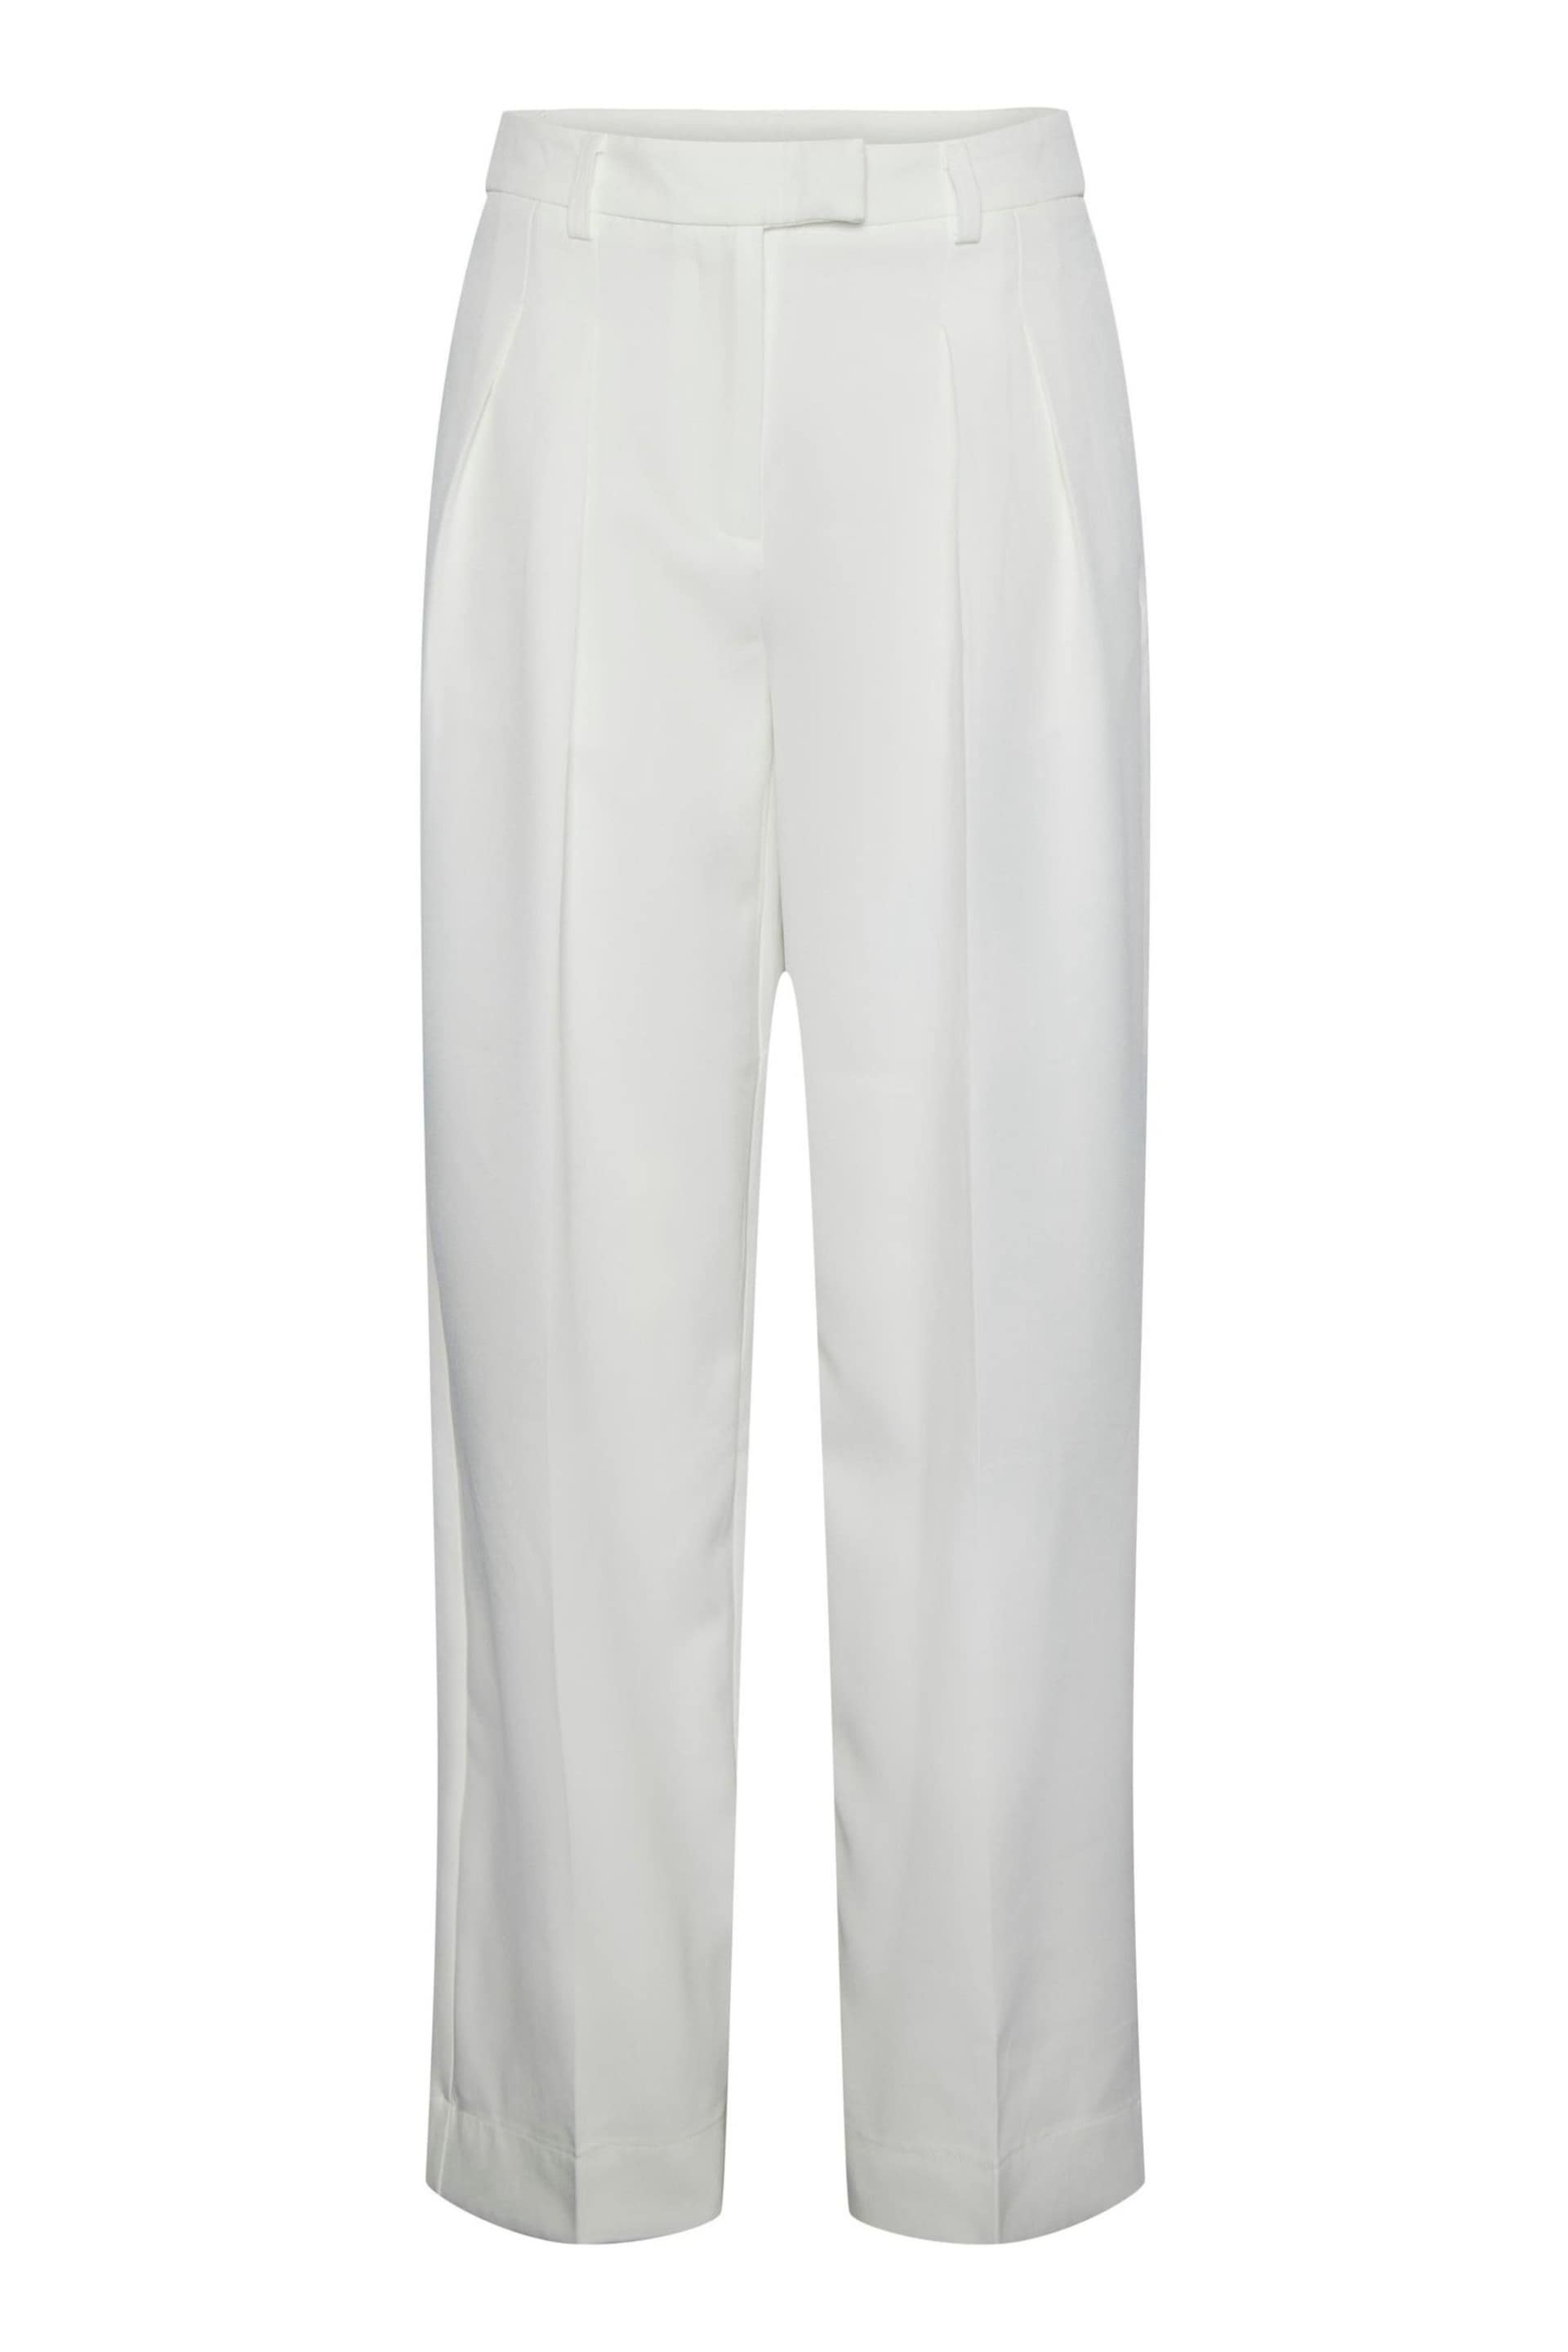 PIECES White High Waisted Wide Leg Trousers - Image 5 of 5